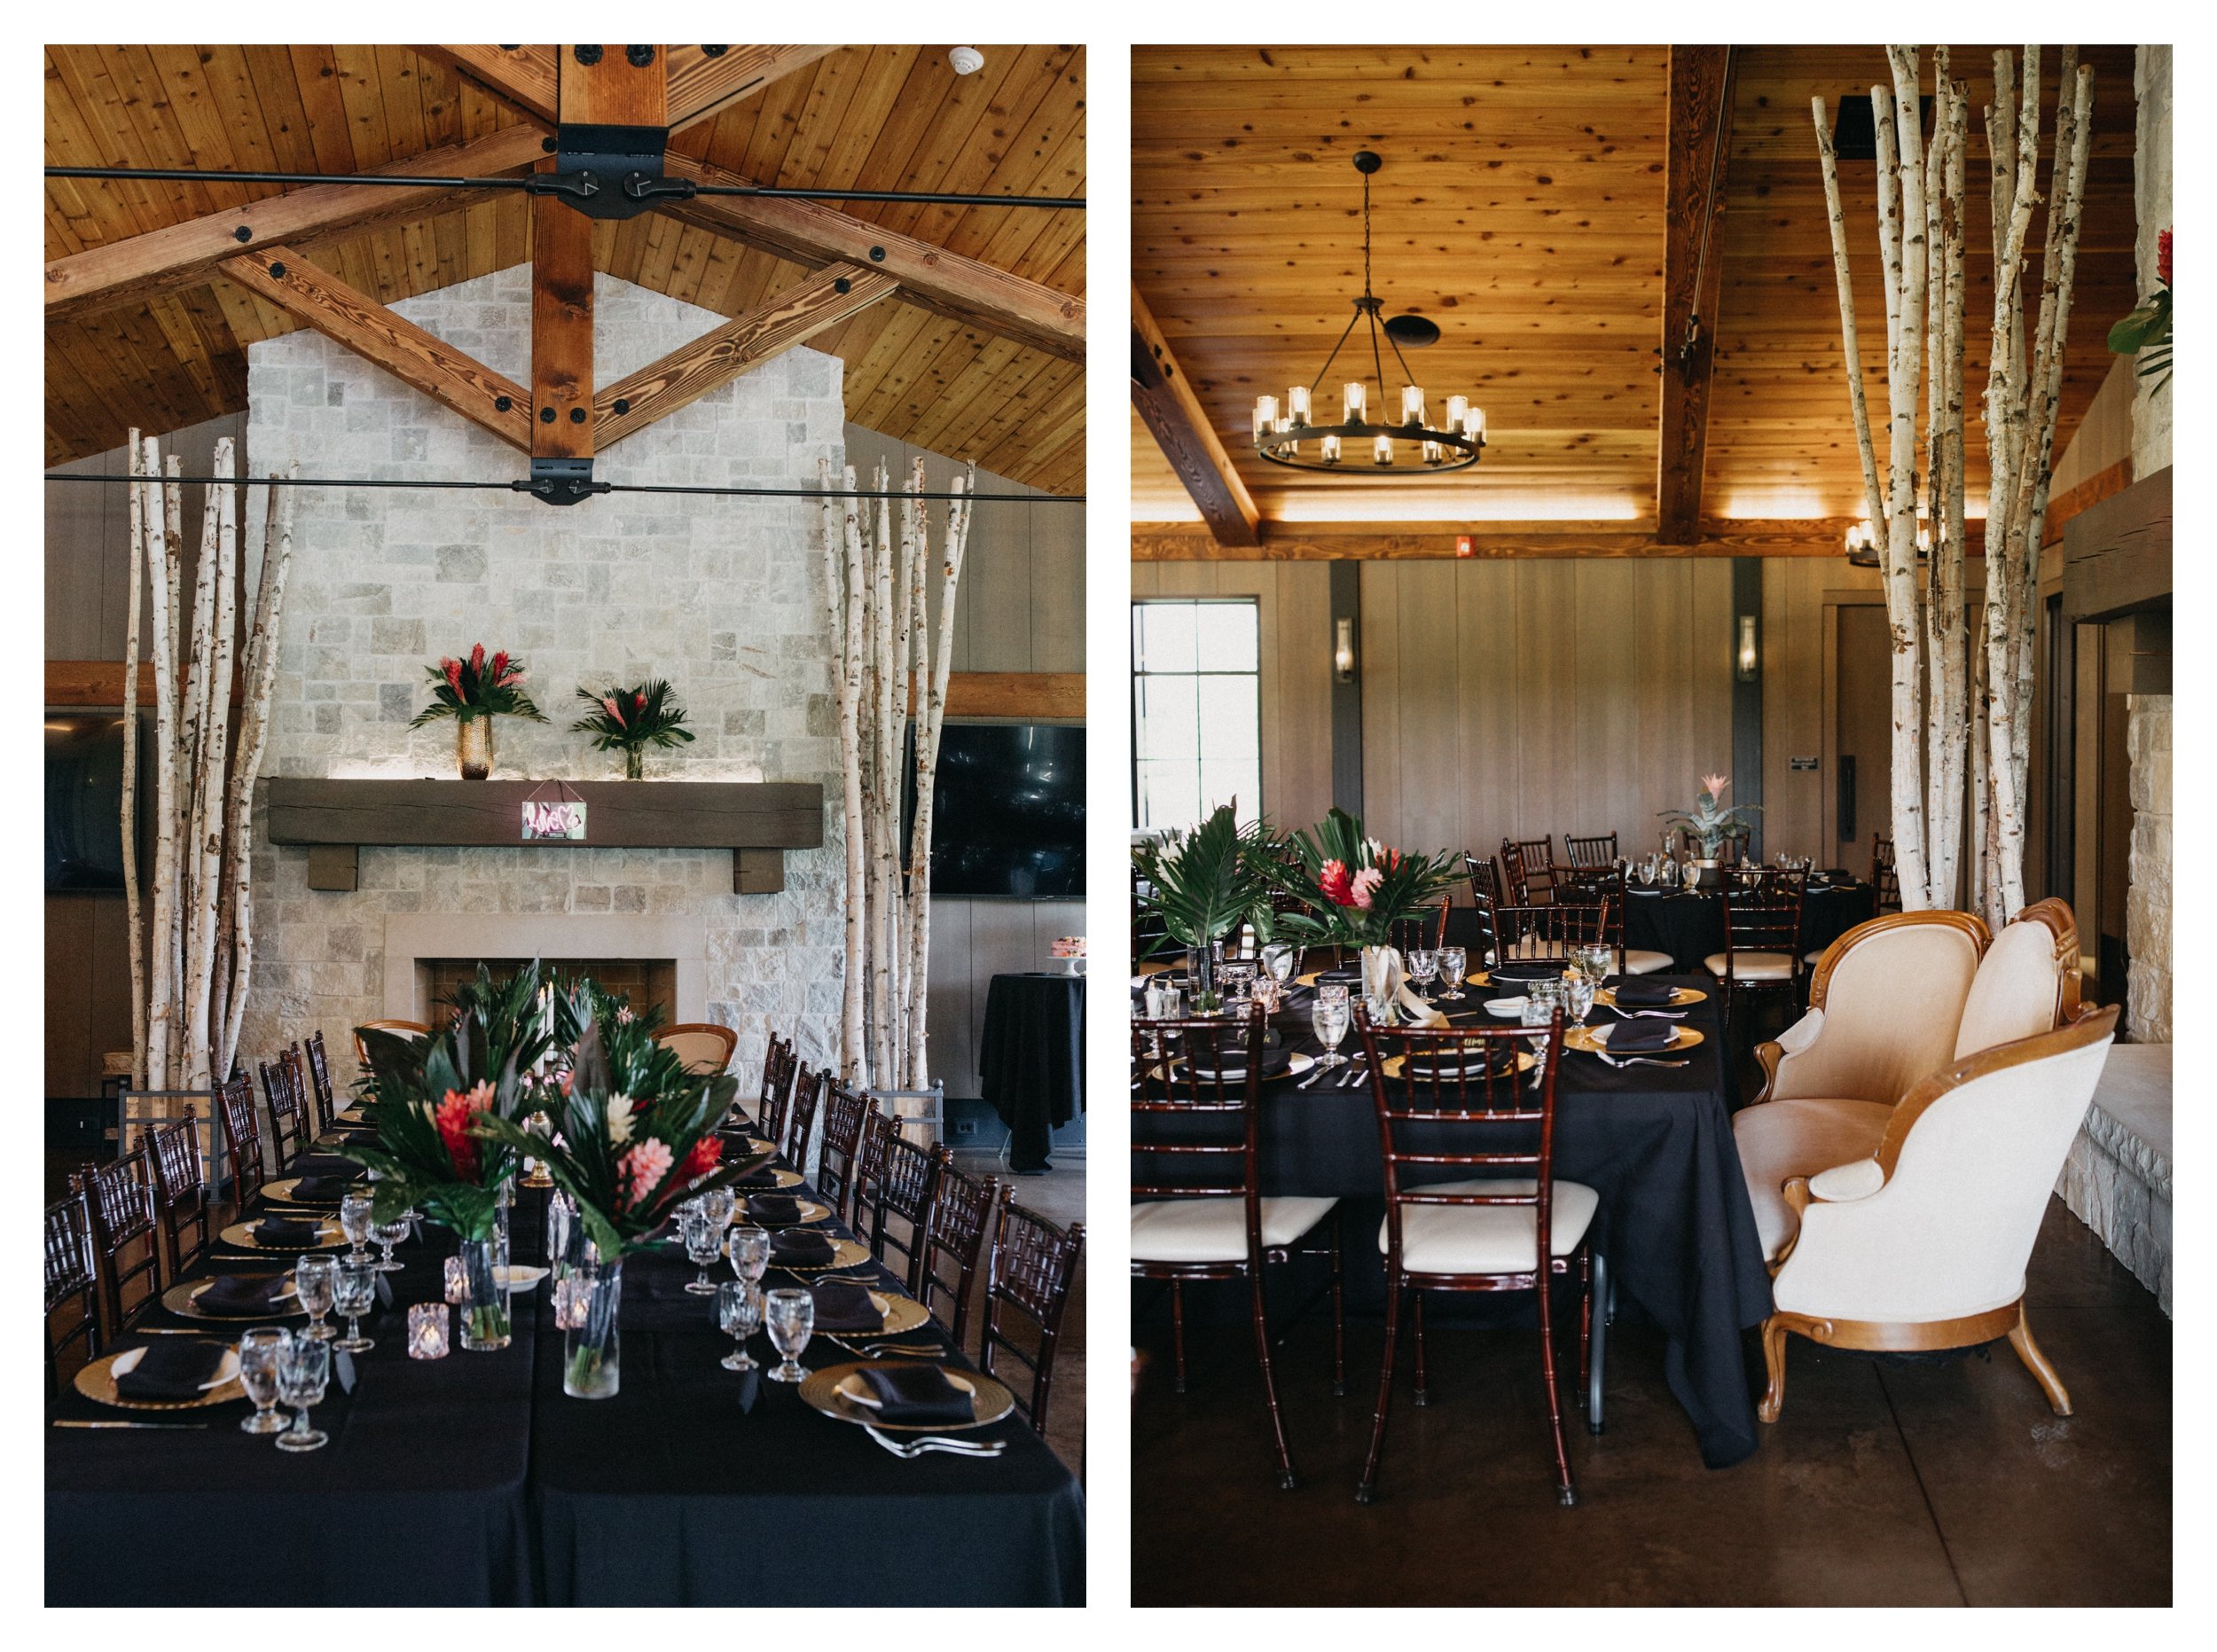 Romantic table setting in front of stone fireplace at 7 Vines vineyard wedding venue